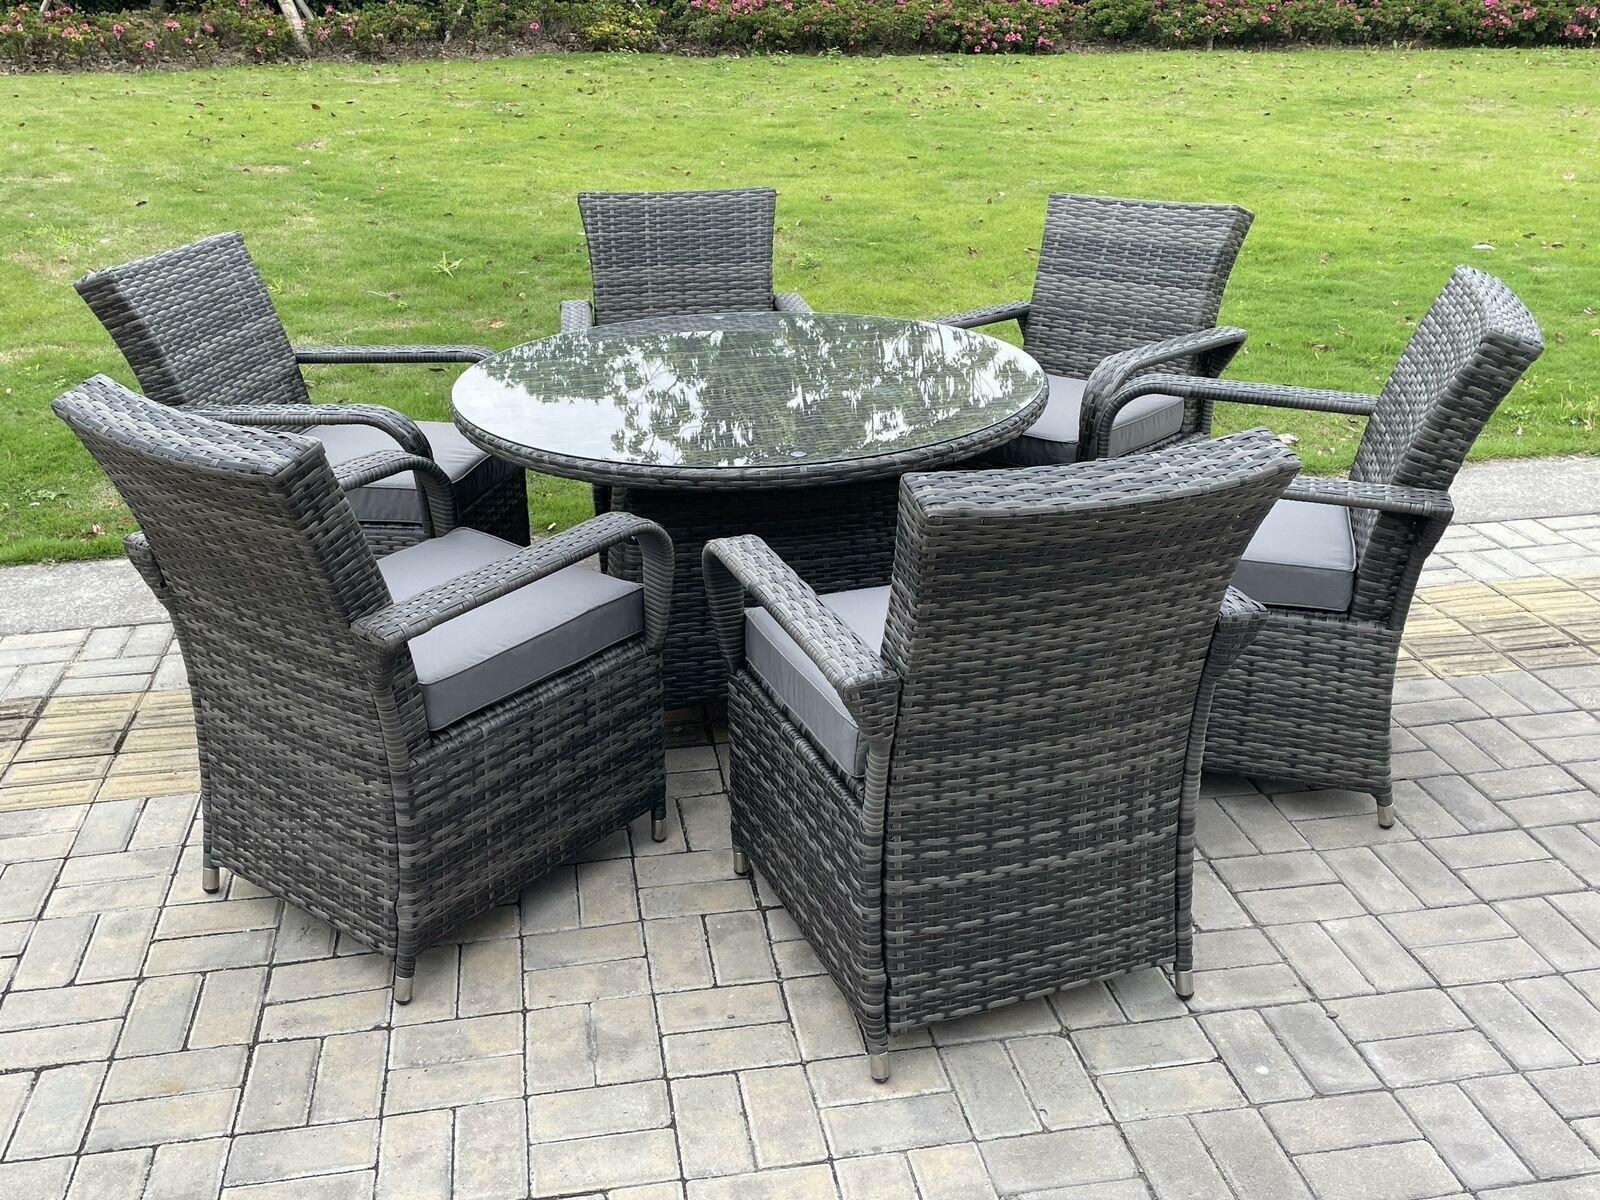 Rattan Garden Furniture Dining Set Table And Chairs WiCker Patio Outdoor 6 Chairs Plus Big Round Tab